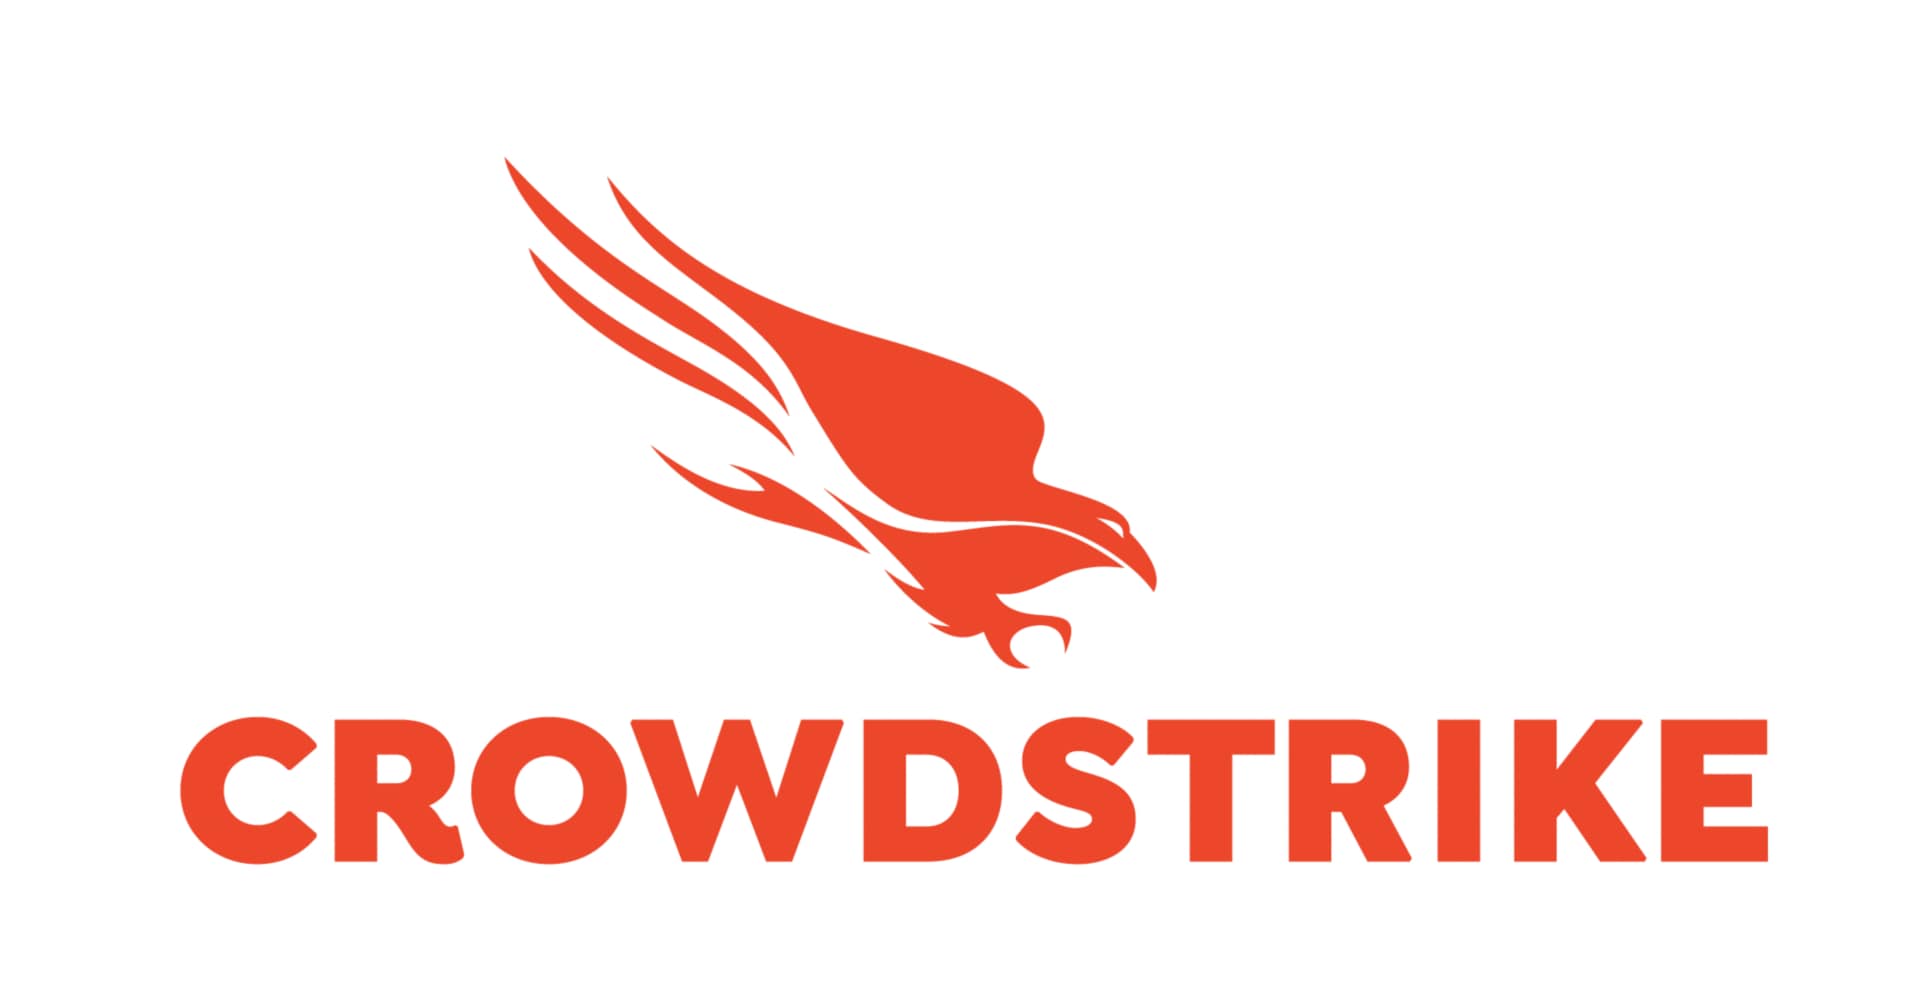 CrowdStrike 12-Month Falcon Firewall Management Software Subscription (10,000-24,999 Licenses)